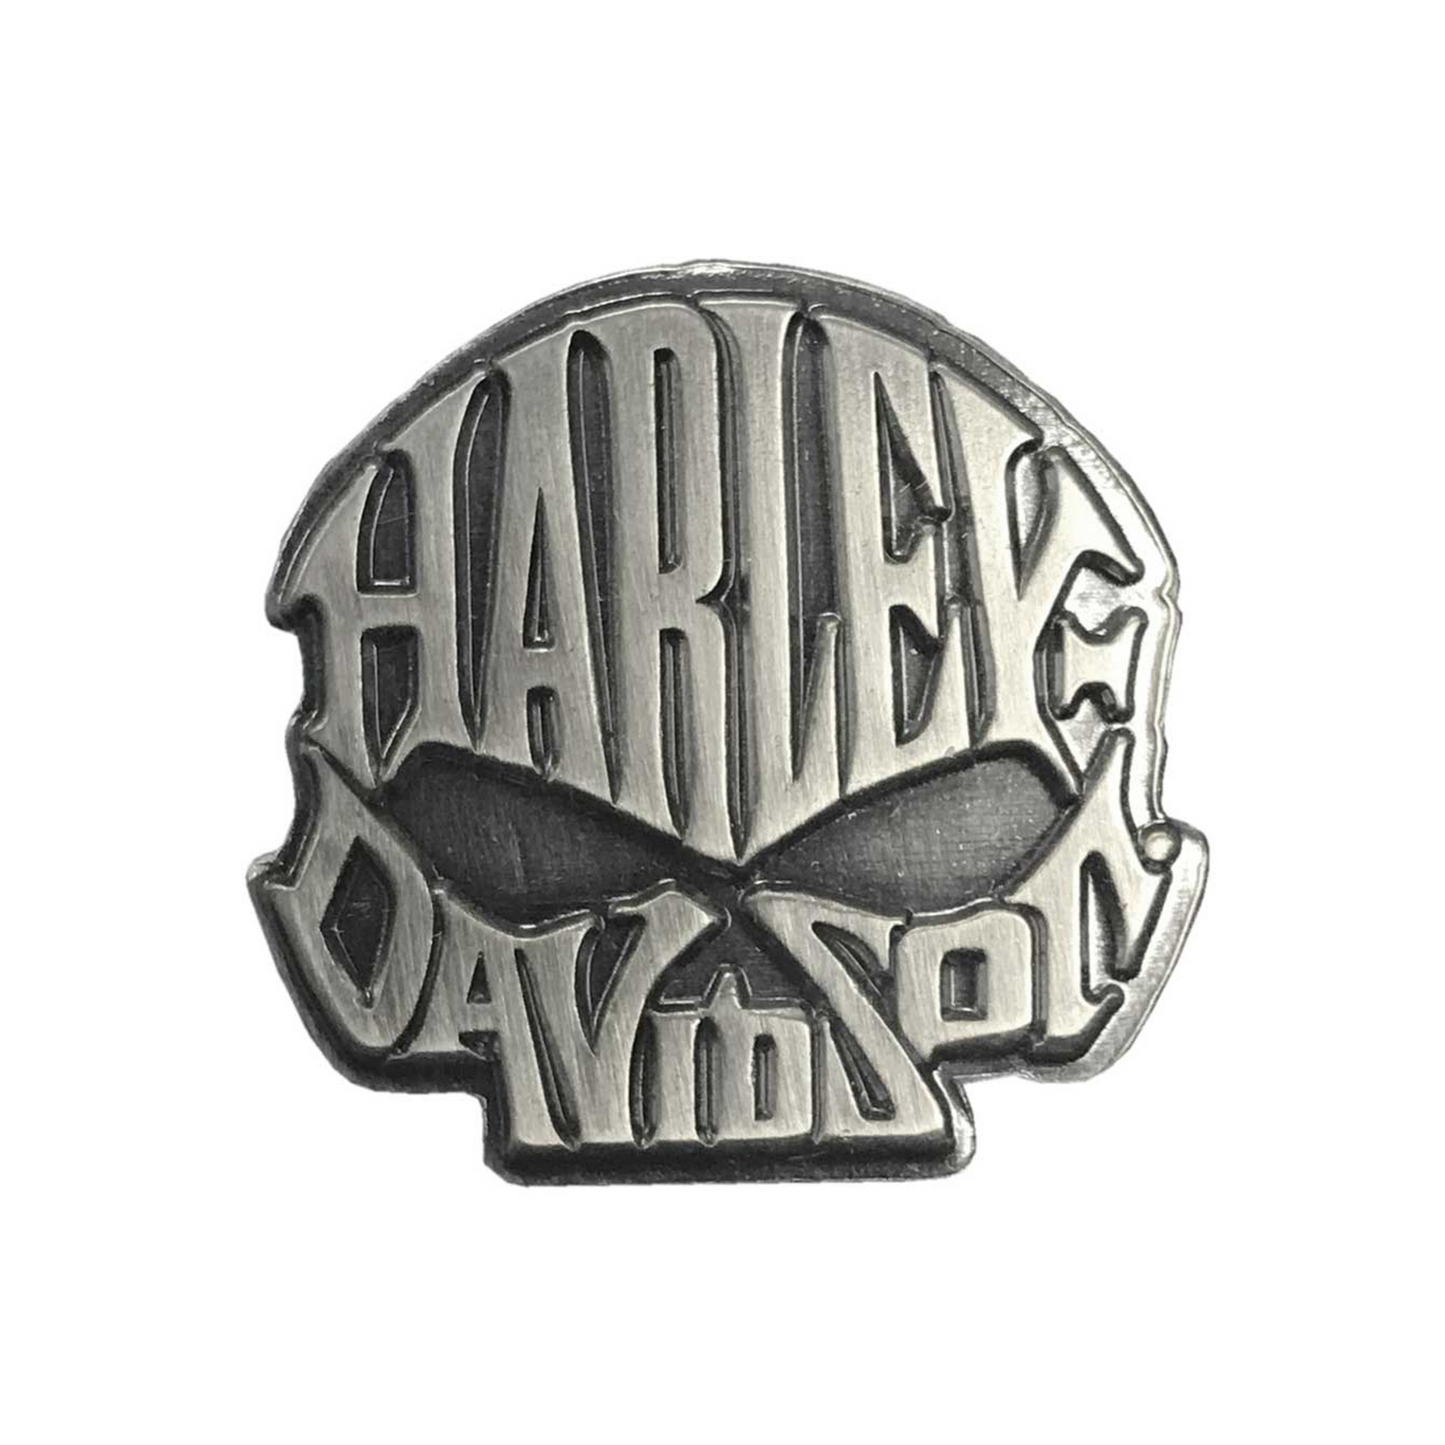 Harley-Davidson® 1 inch Willie G. Skull Text Pin - Antique Silver Finish